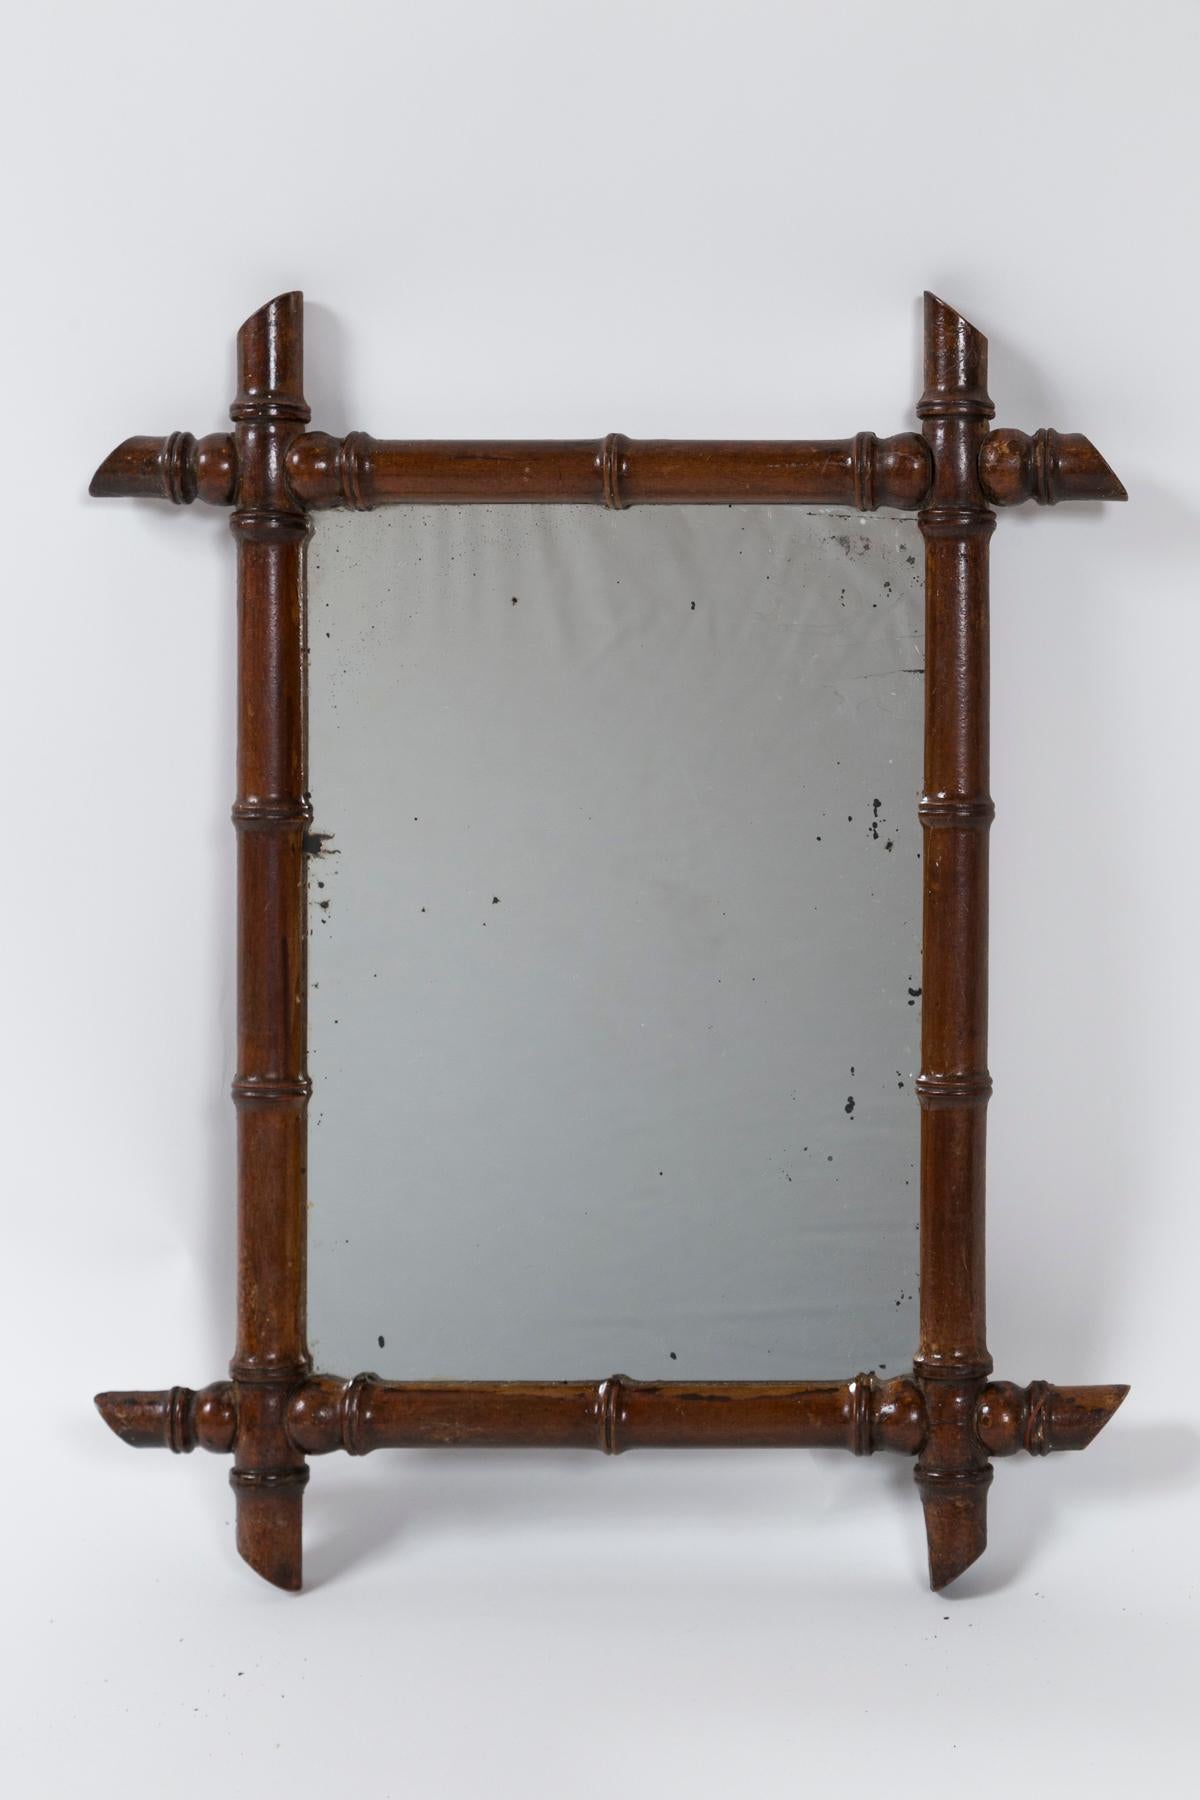 Antique French Faux bamboo mirror, circa 1910. Original glass with new backing. Dark brown wood, turned to simulate bamboo. A classic country French design.